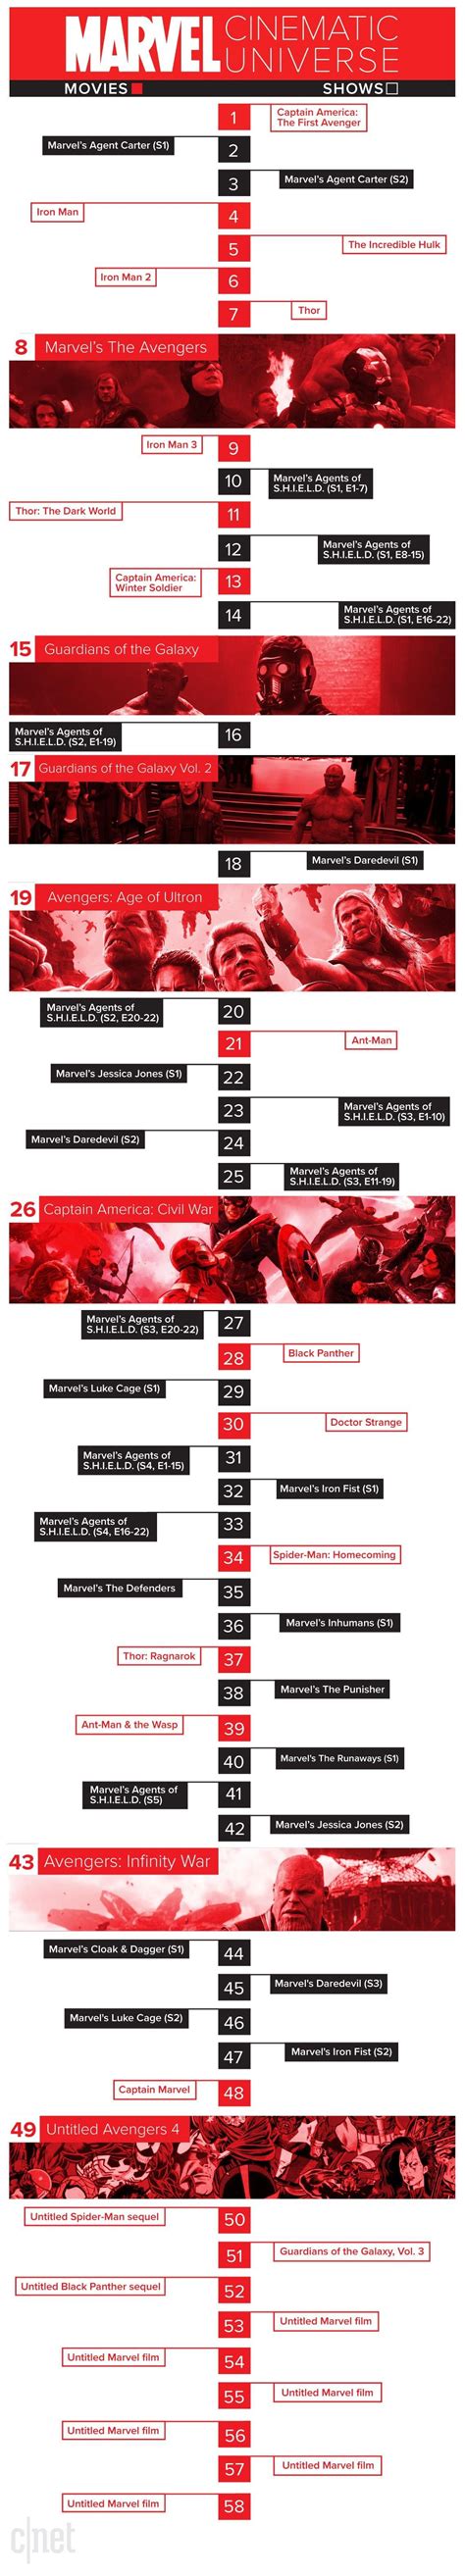 How to watch the marvel movies. MCU - Chronological viewing order, including every movie ...